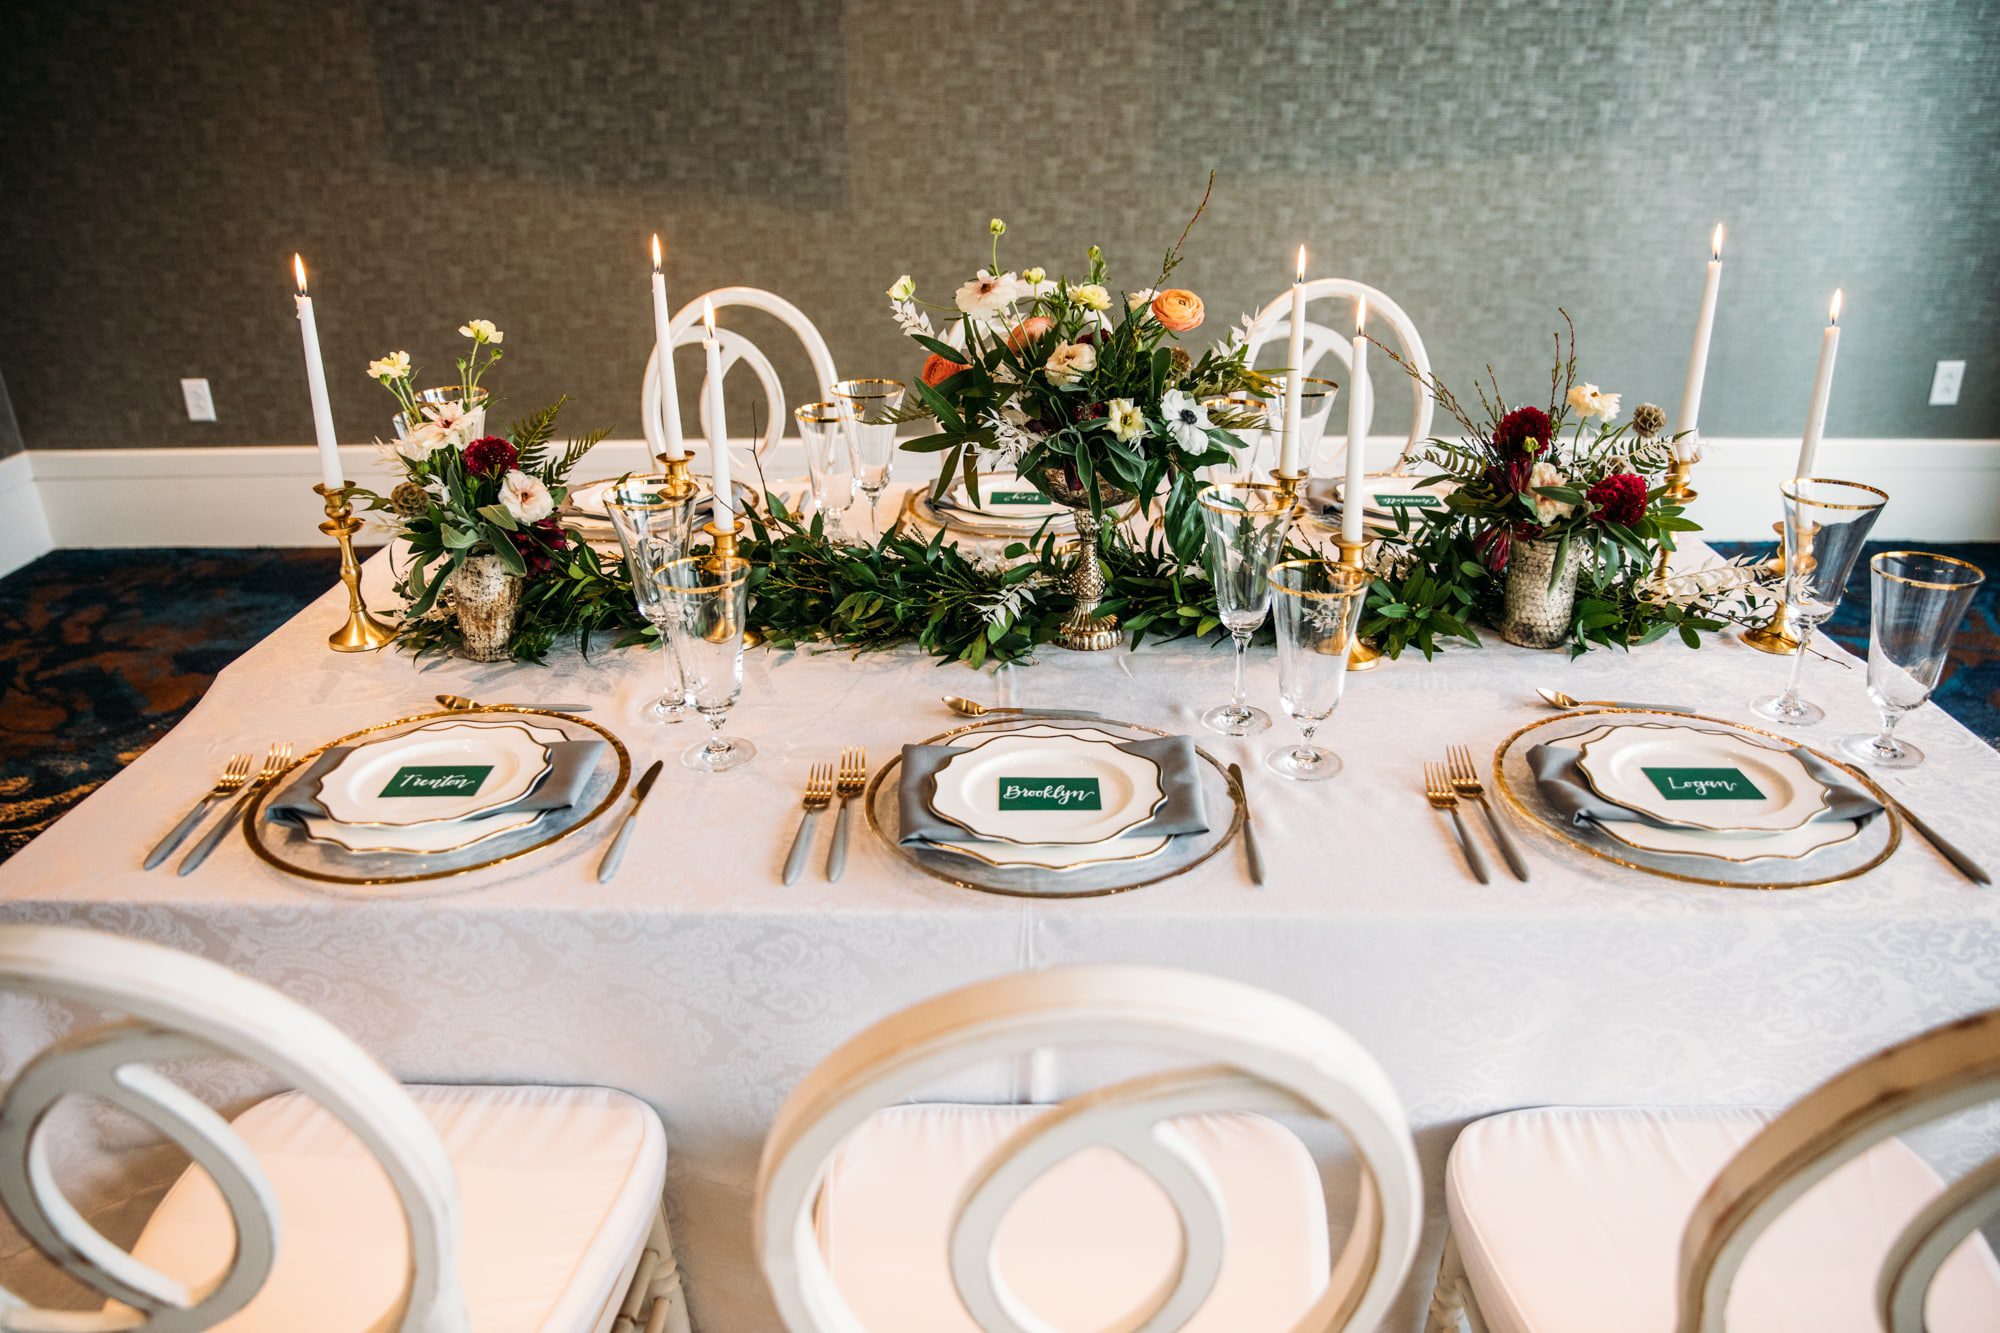 emerald wedding, wedding color inspiration, emerald and gold wedding, emerald and mustard wedding colors, gold silverware, elegant wedding tablescape, emerald wedding name tags, emerald name cards for table, white and gold candles